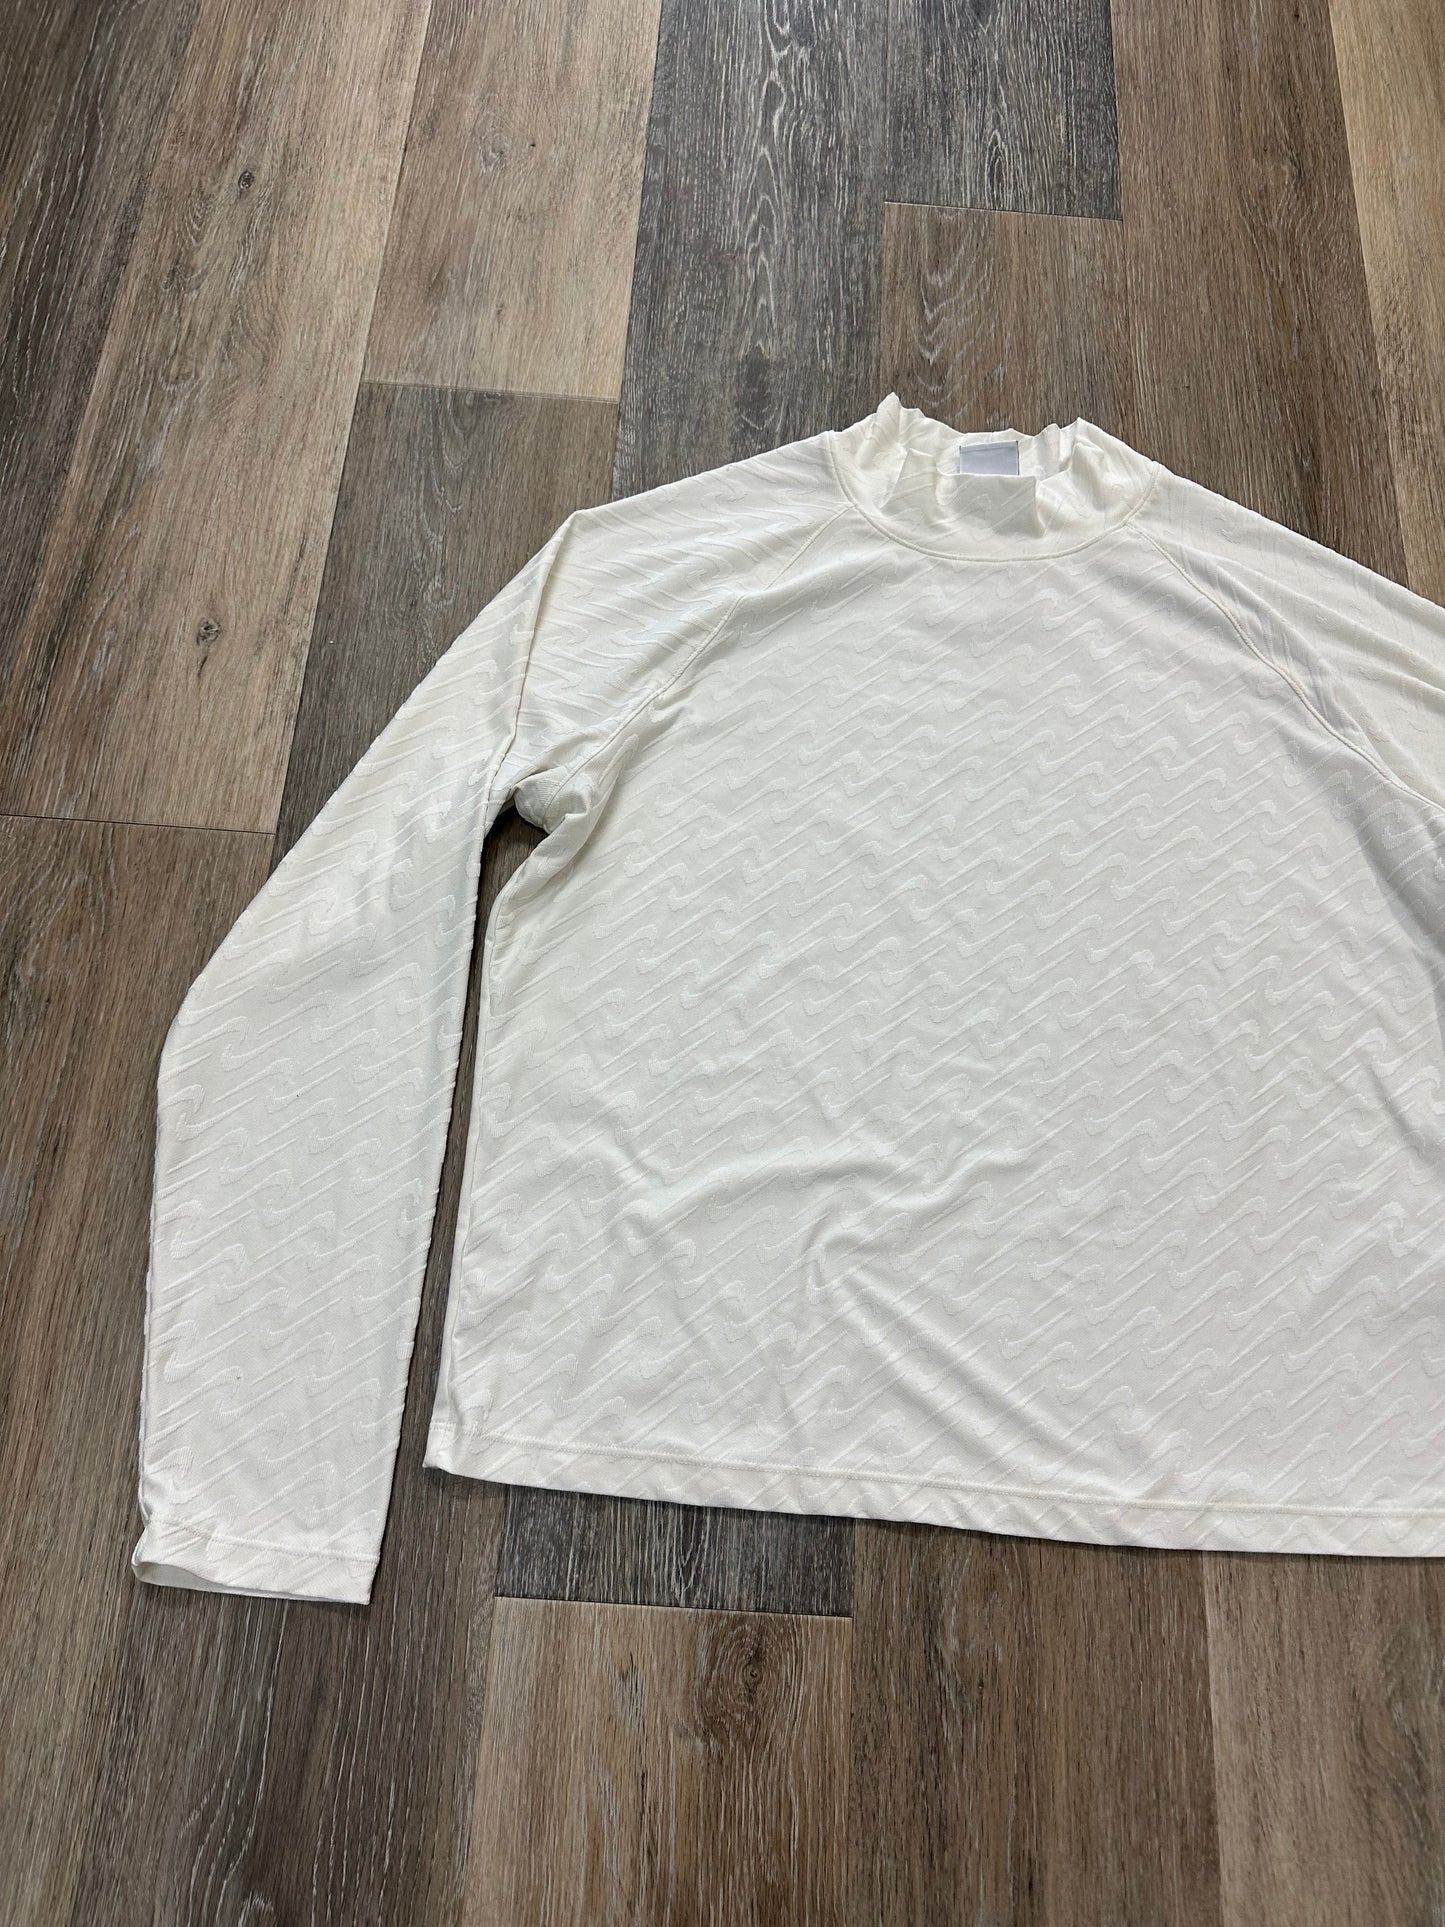 White Athletic Top Long Sleeve Crewneck Nike Apparel, Size Xl